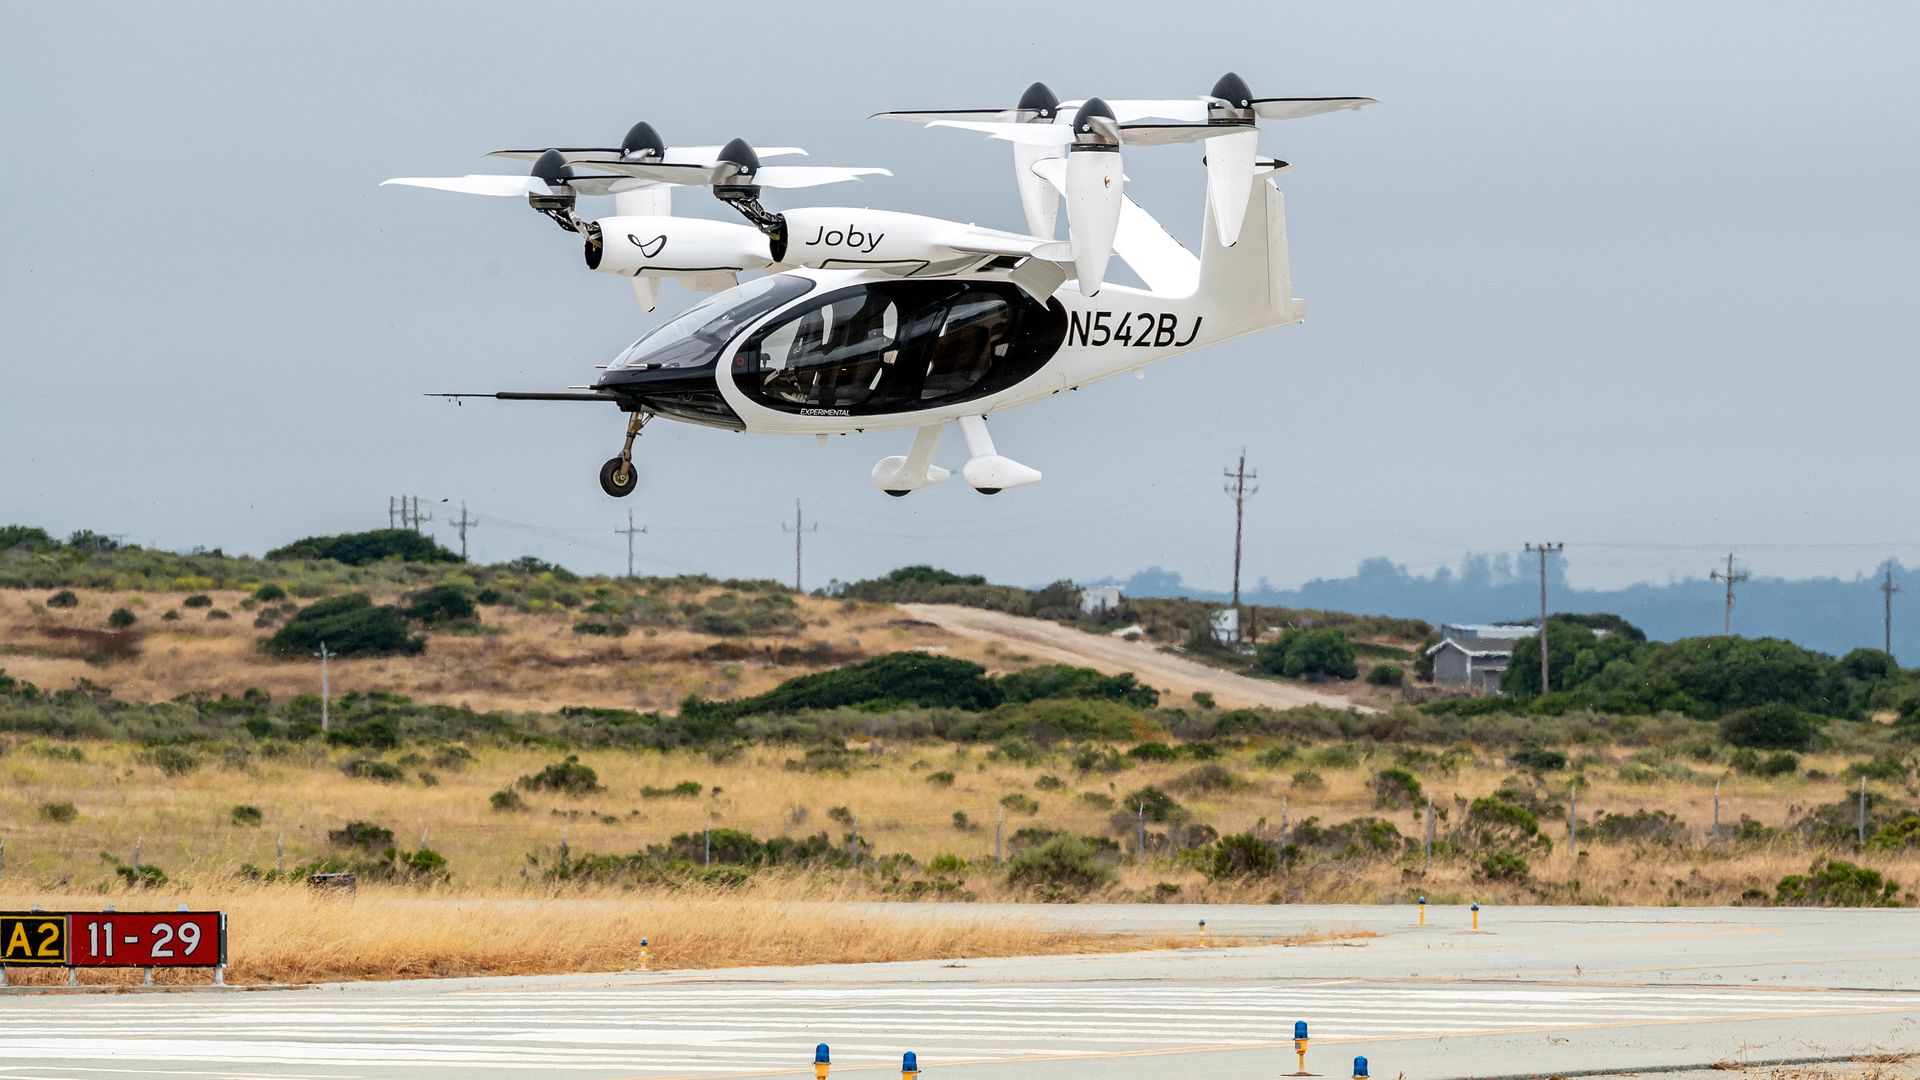 Joby Aviation's pre-production prototype electric vertical take-off and landing (eVTOL) aircraft during a demonstration at an event in Marina, California, US, on Wednesday, June 28, 2023.